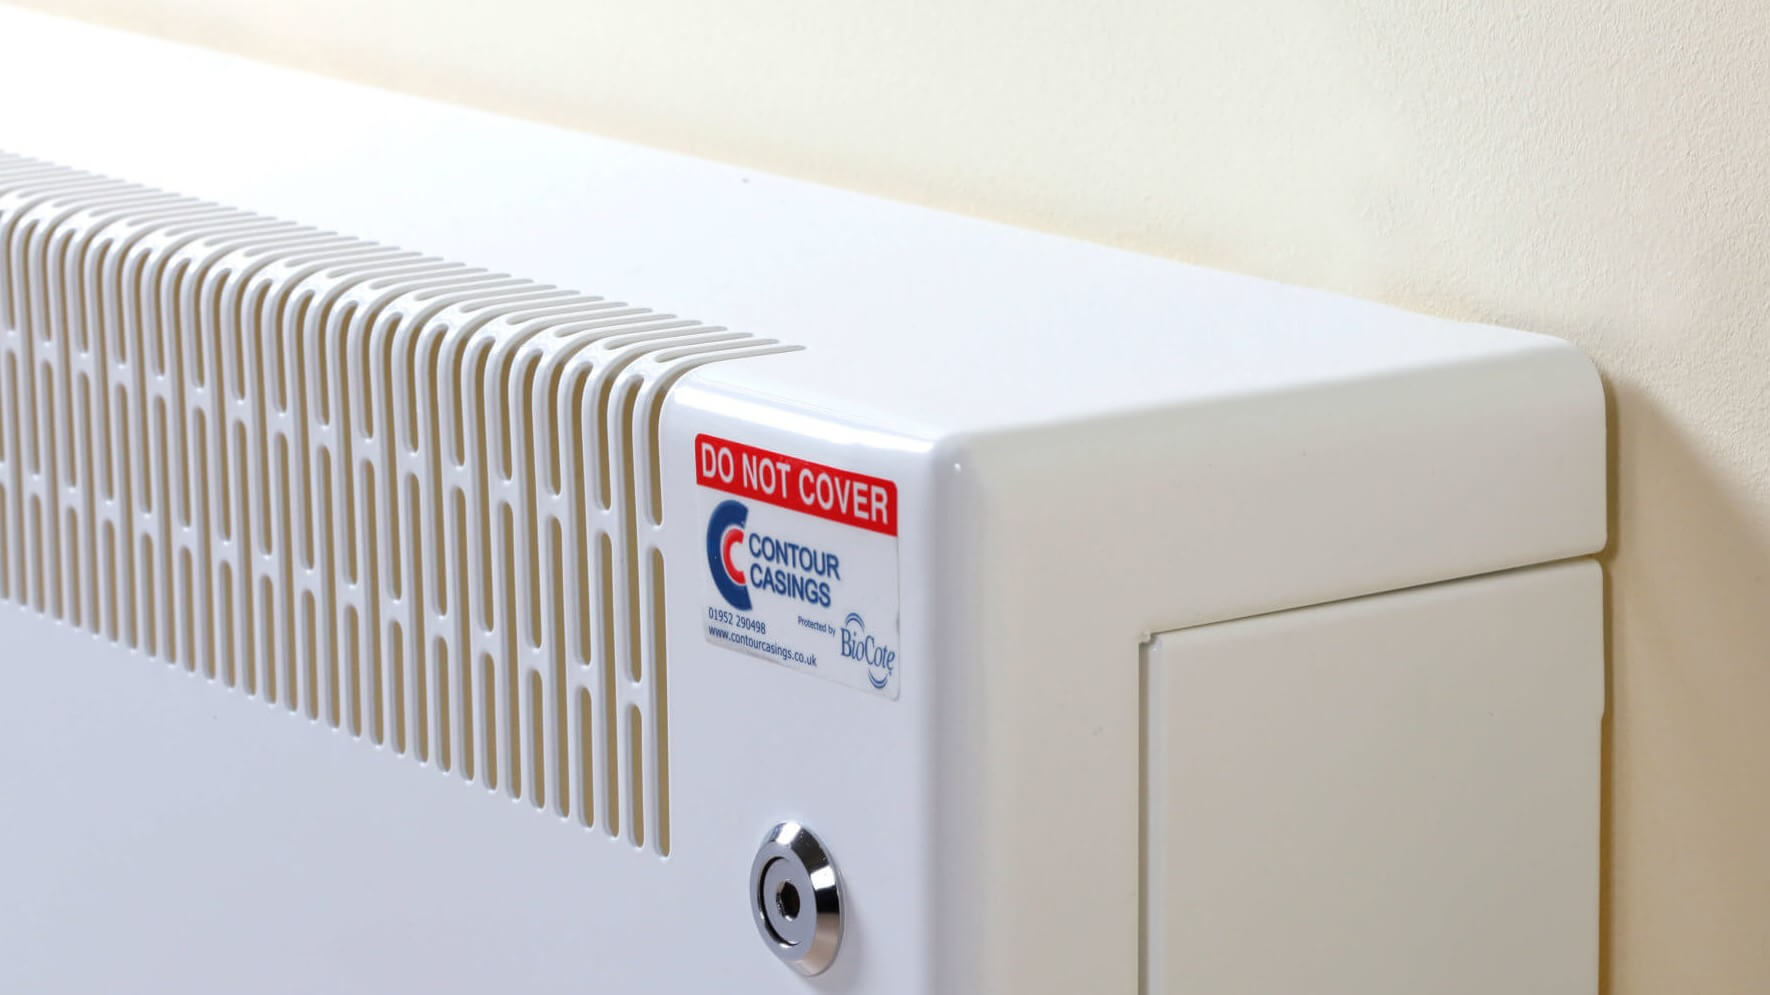 Safe Corners on Metal Radiator Covers Prevents Injuries From Trips and Falls